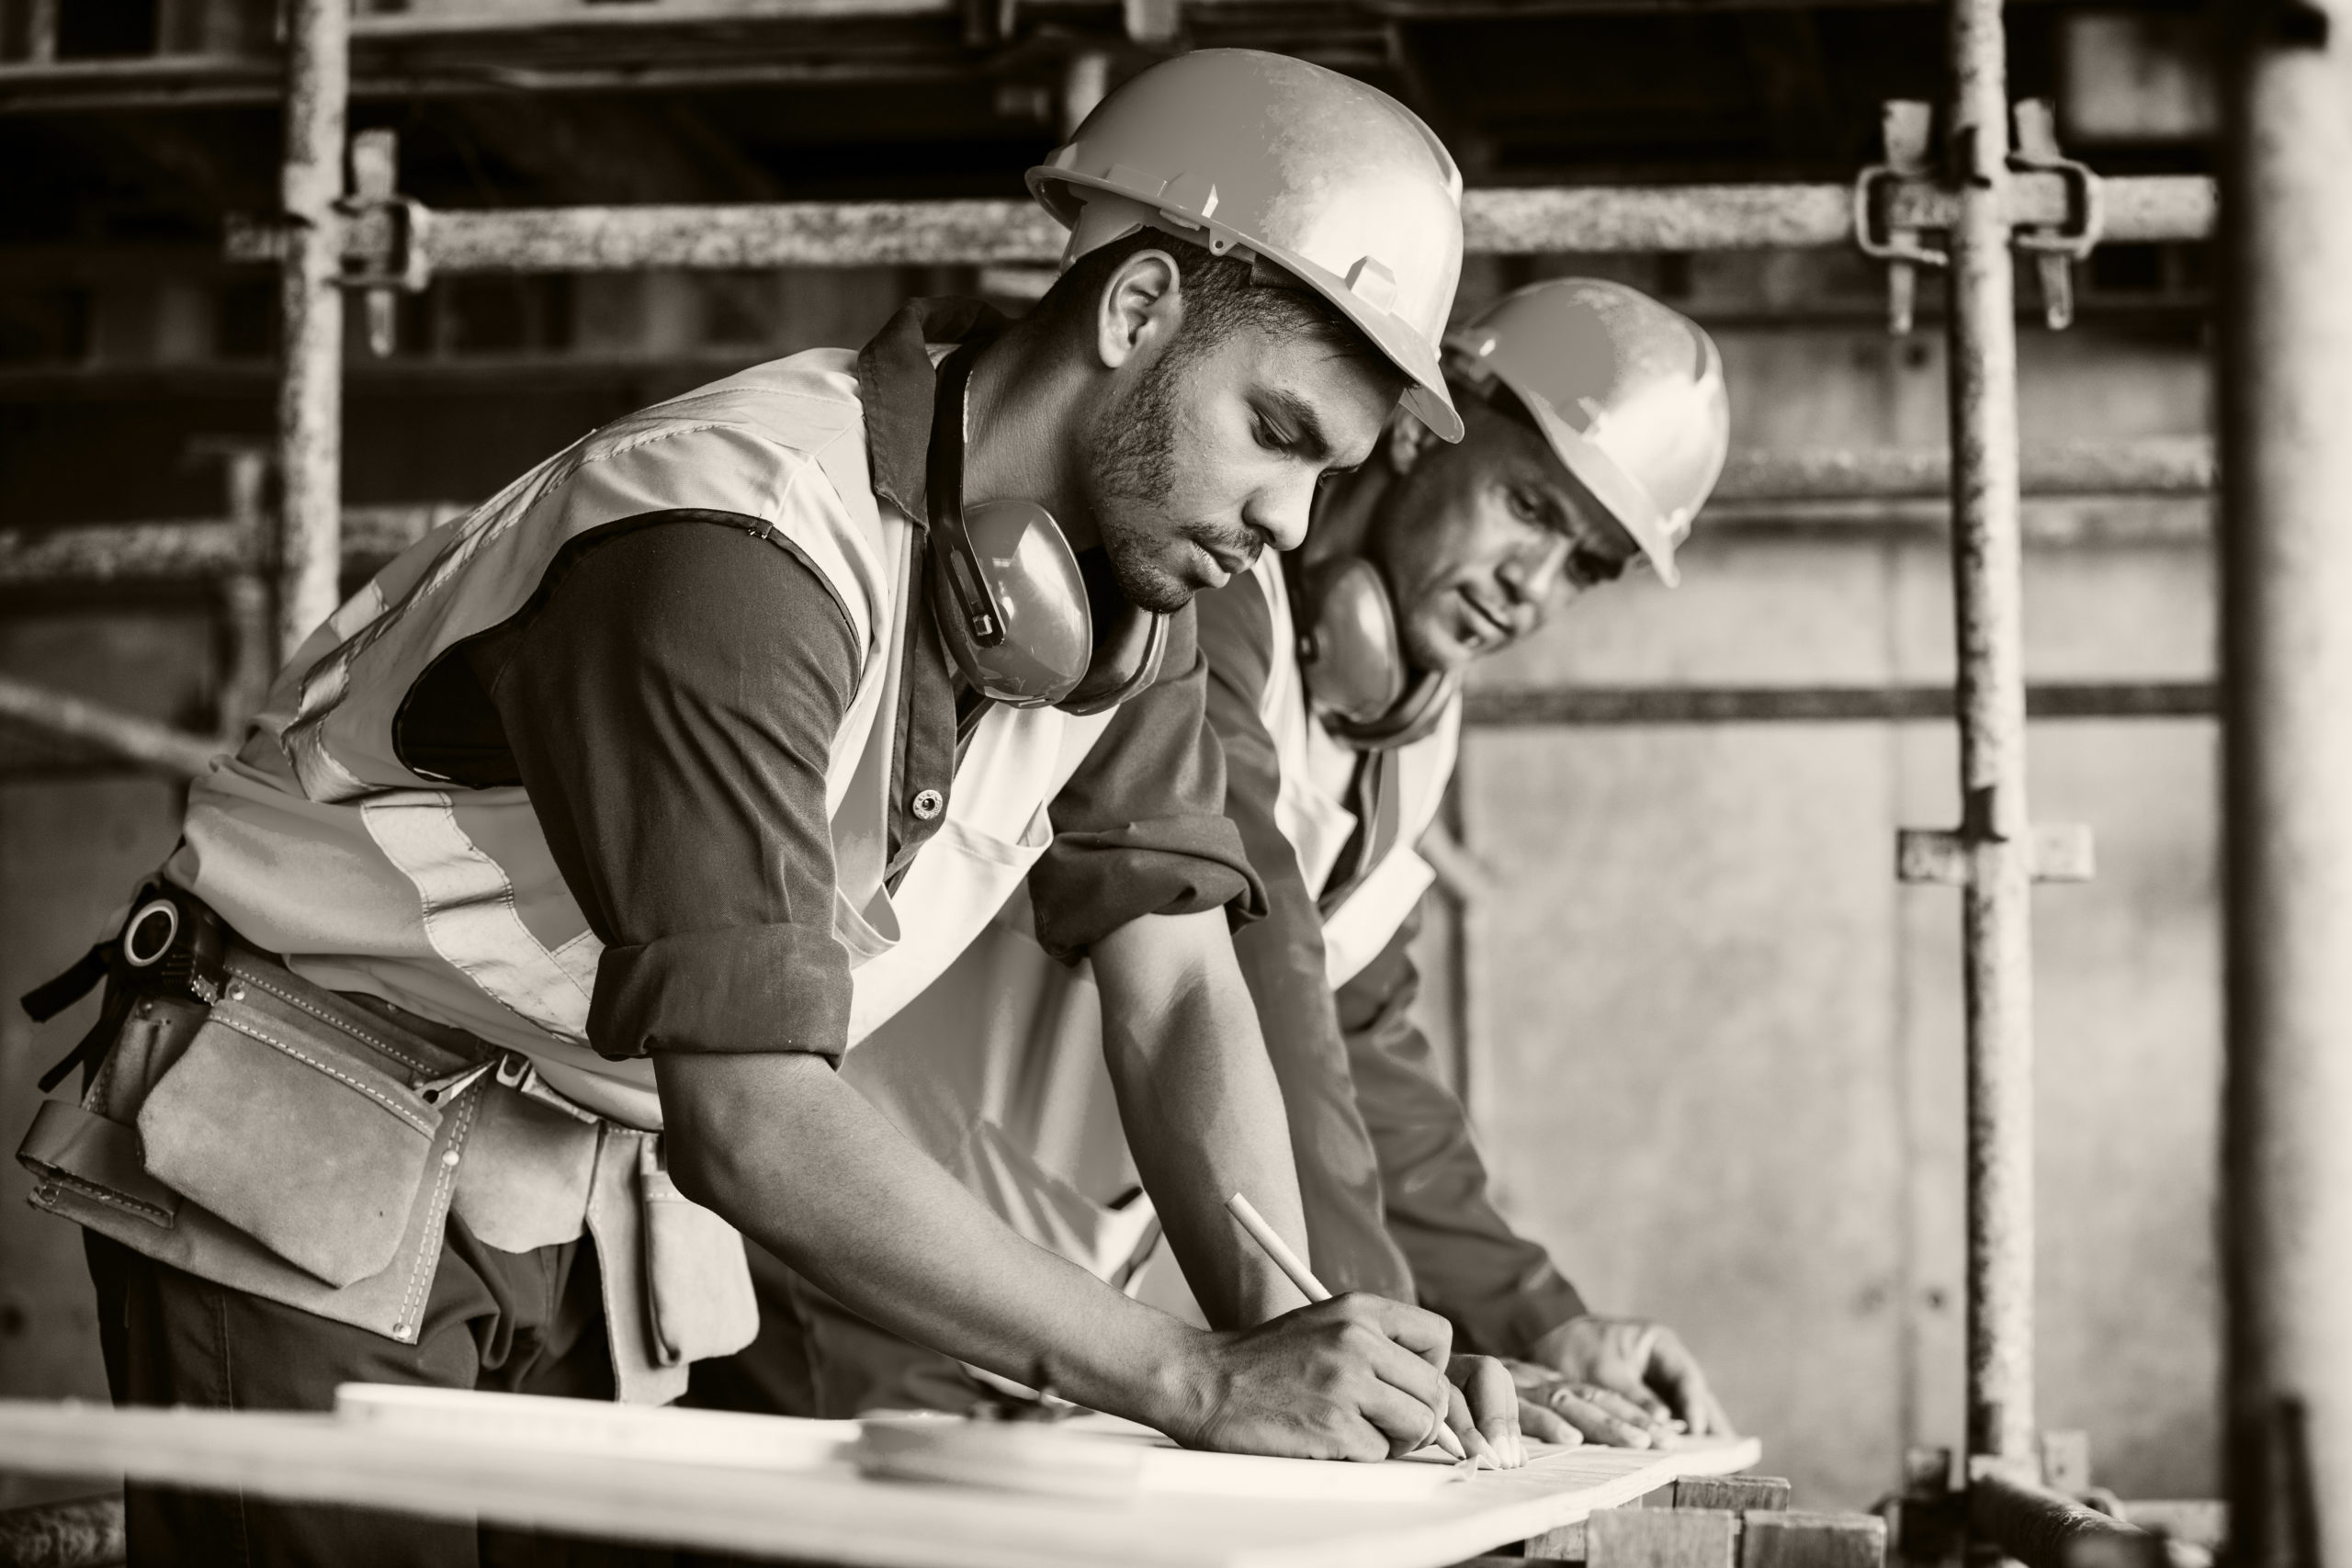 Two men in hardhats, one younger than the other, look over blueprints